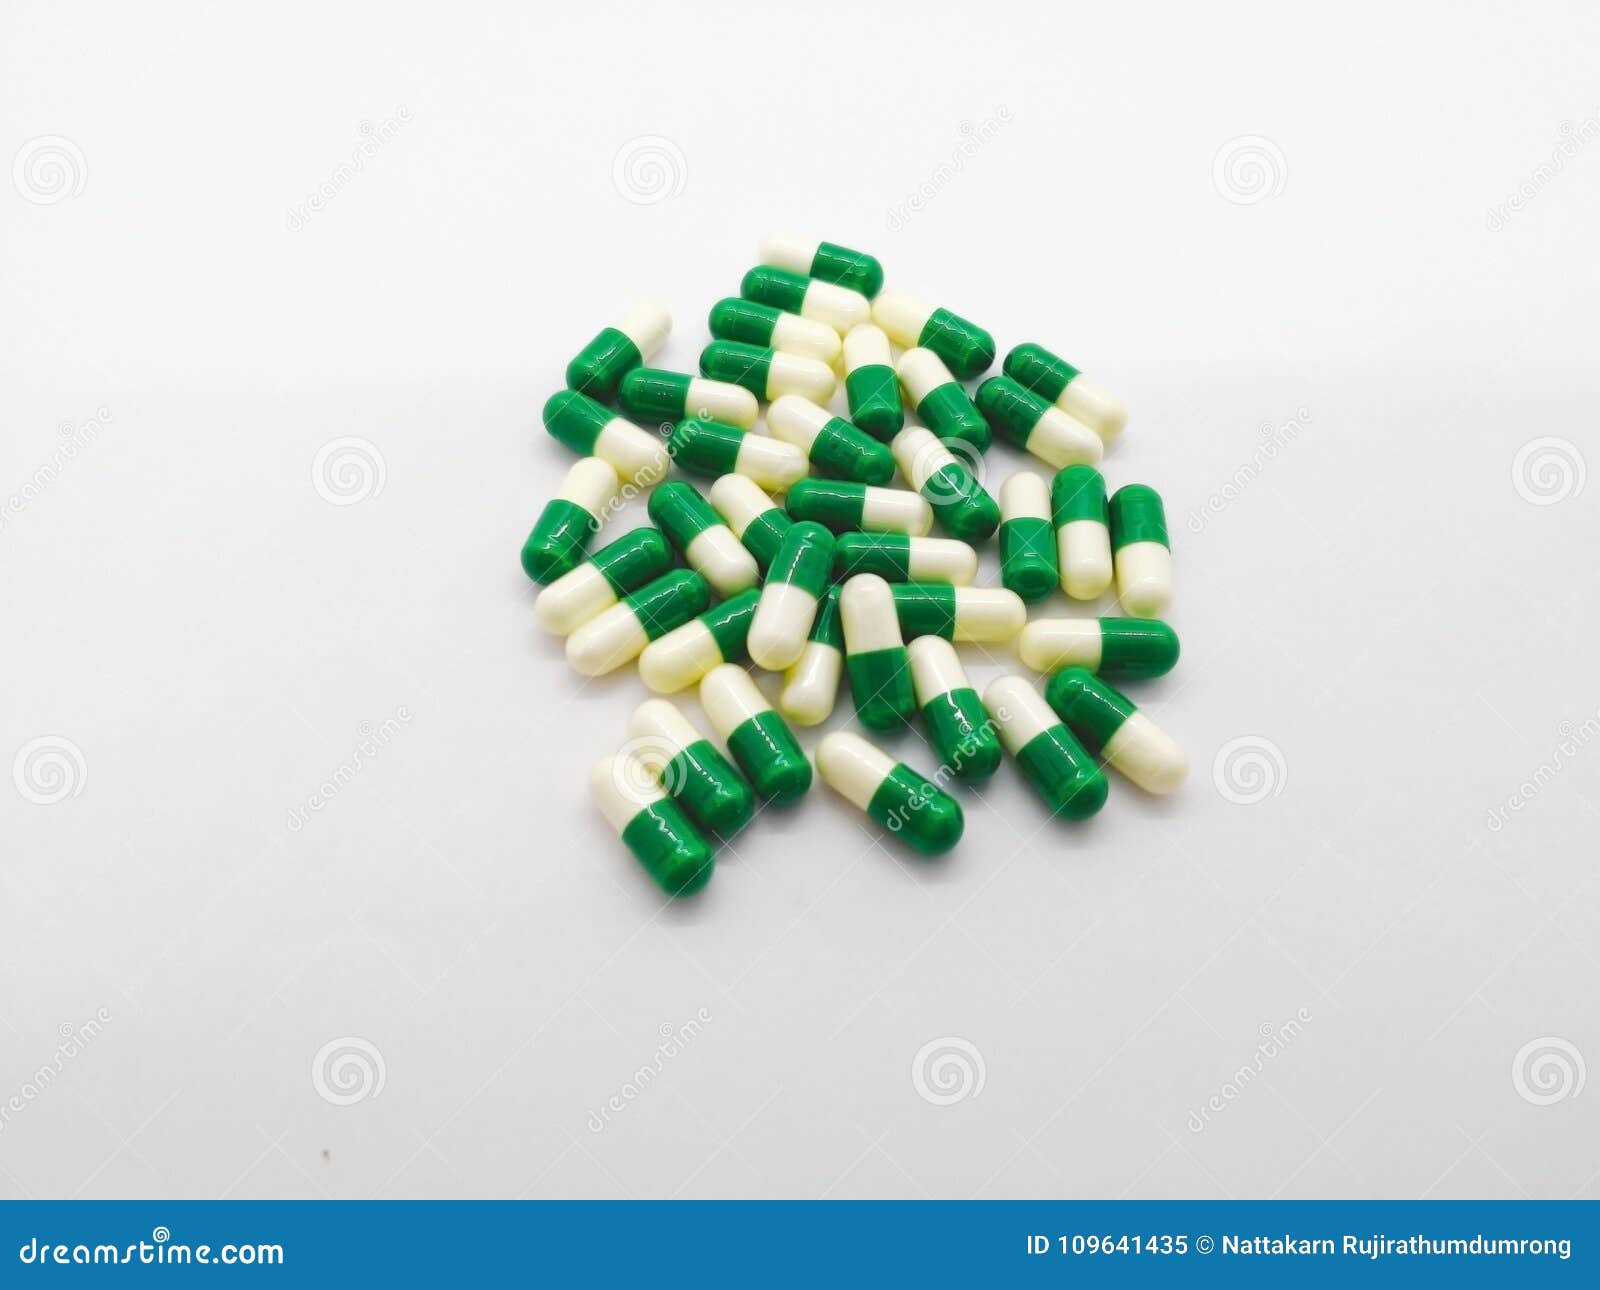 Medication And Healthcare Concept Many White Green Capsules Of Stock Image Image Of Abuse Analgesic